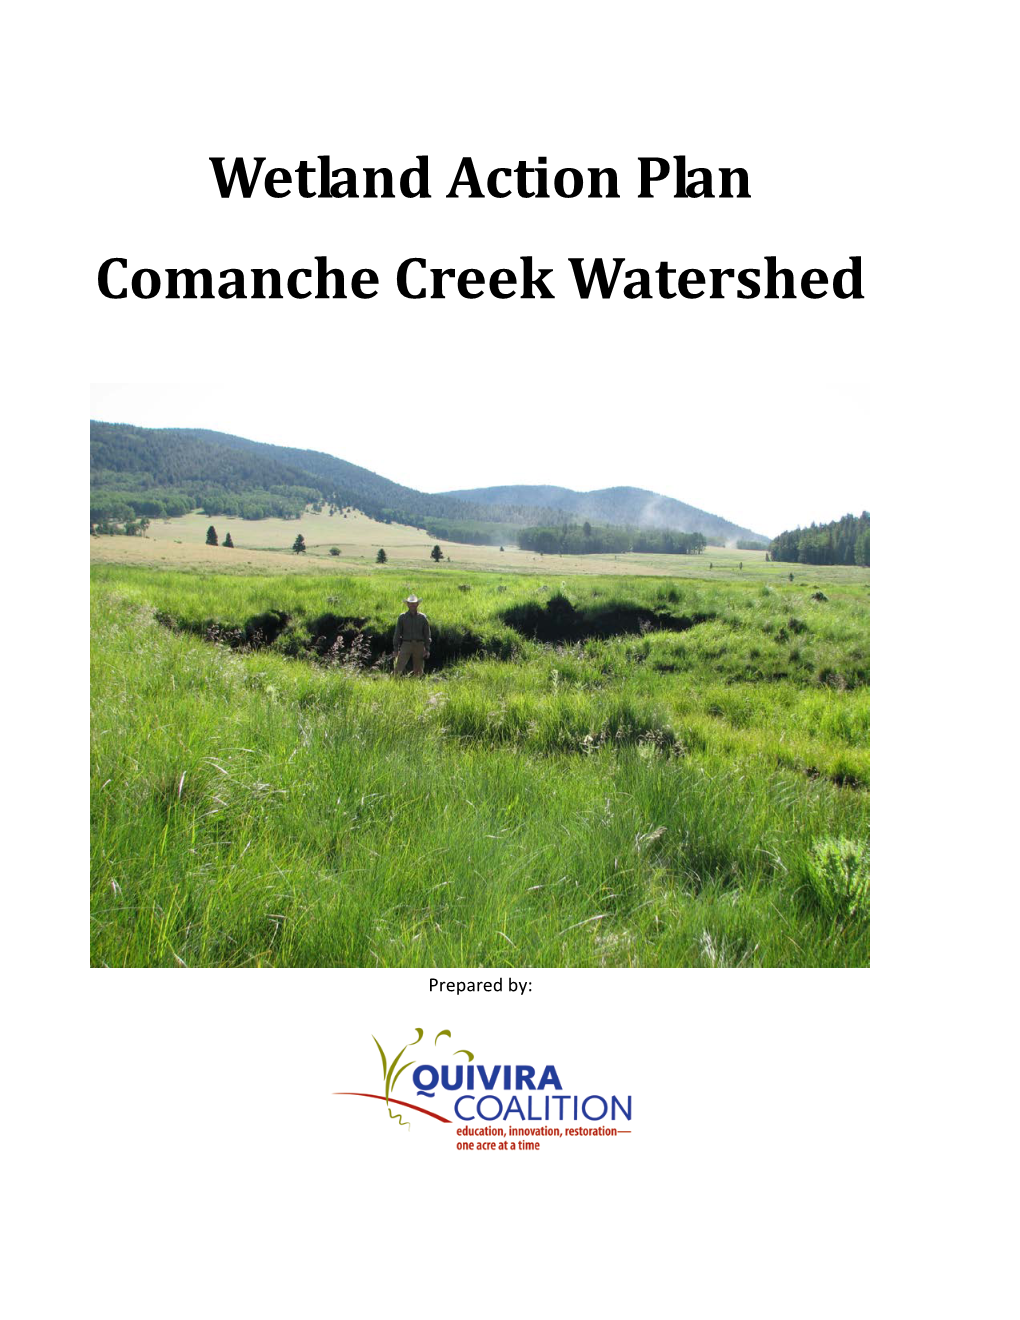 Wetland Action Plan Comanche Creek Watershed